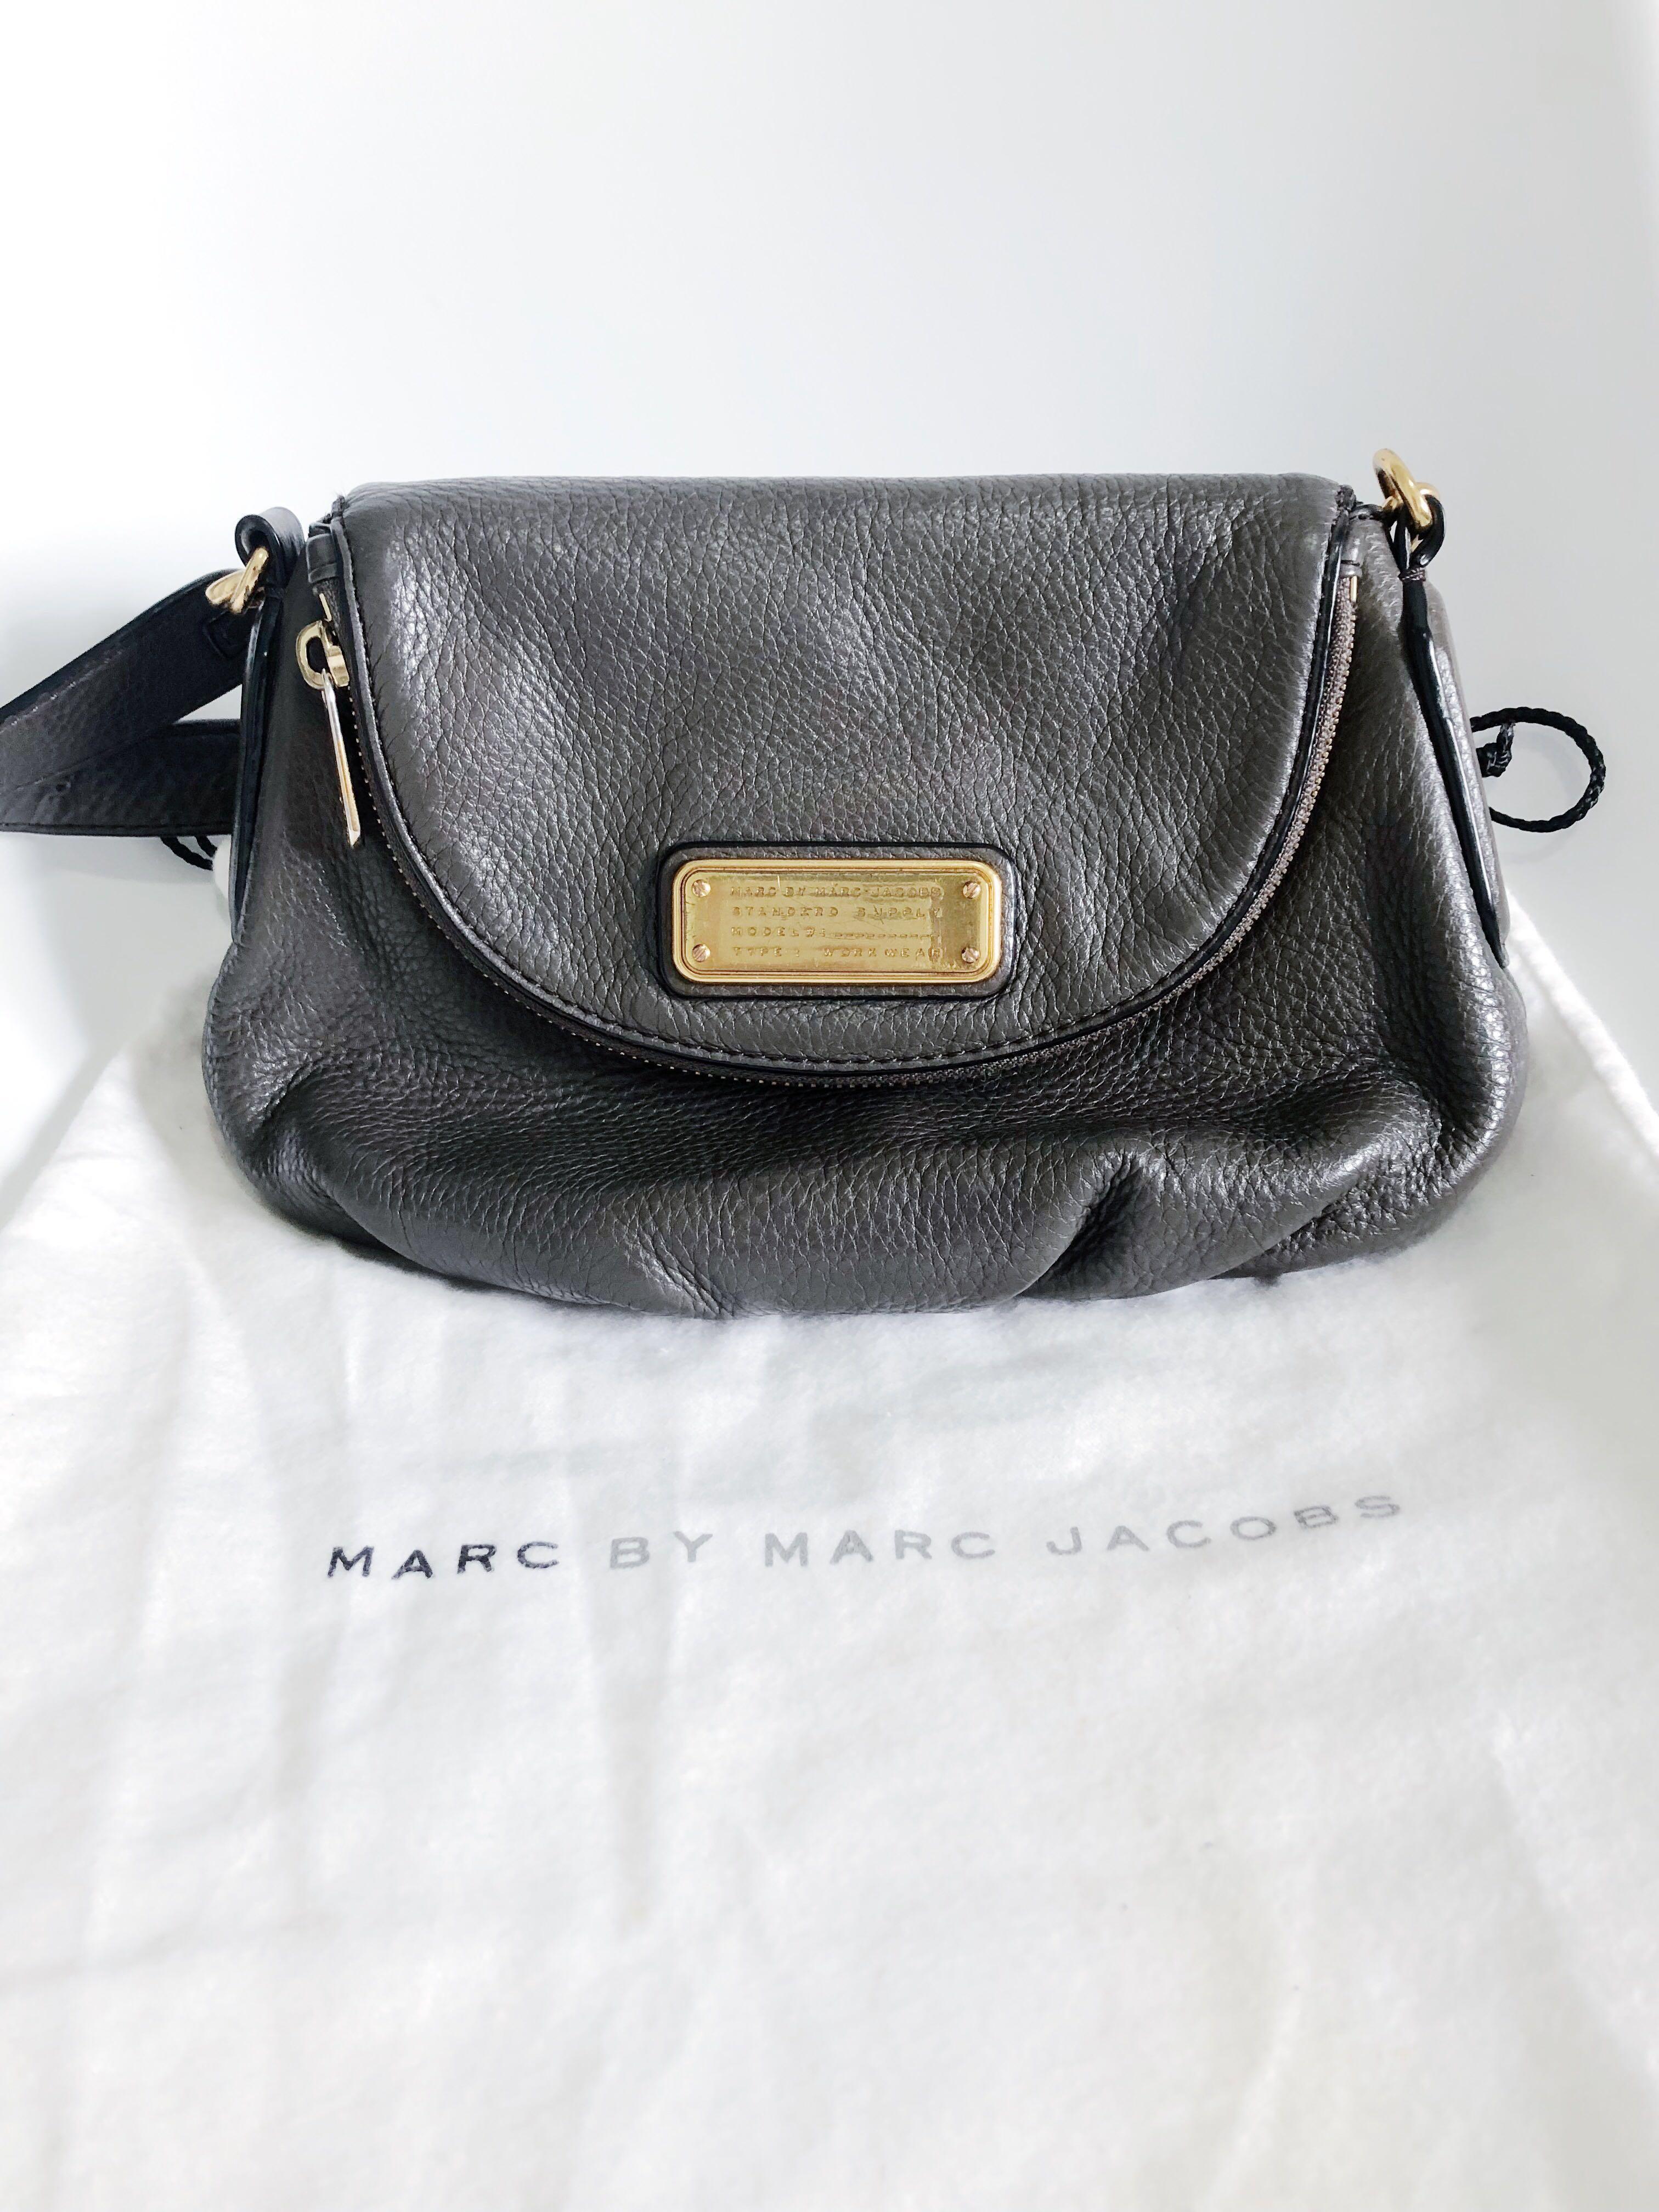 marc by marc jacobs bags